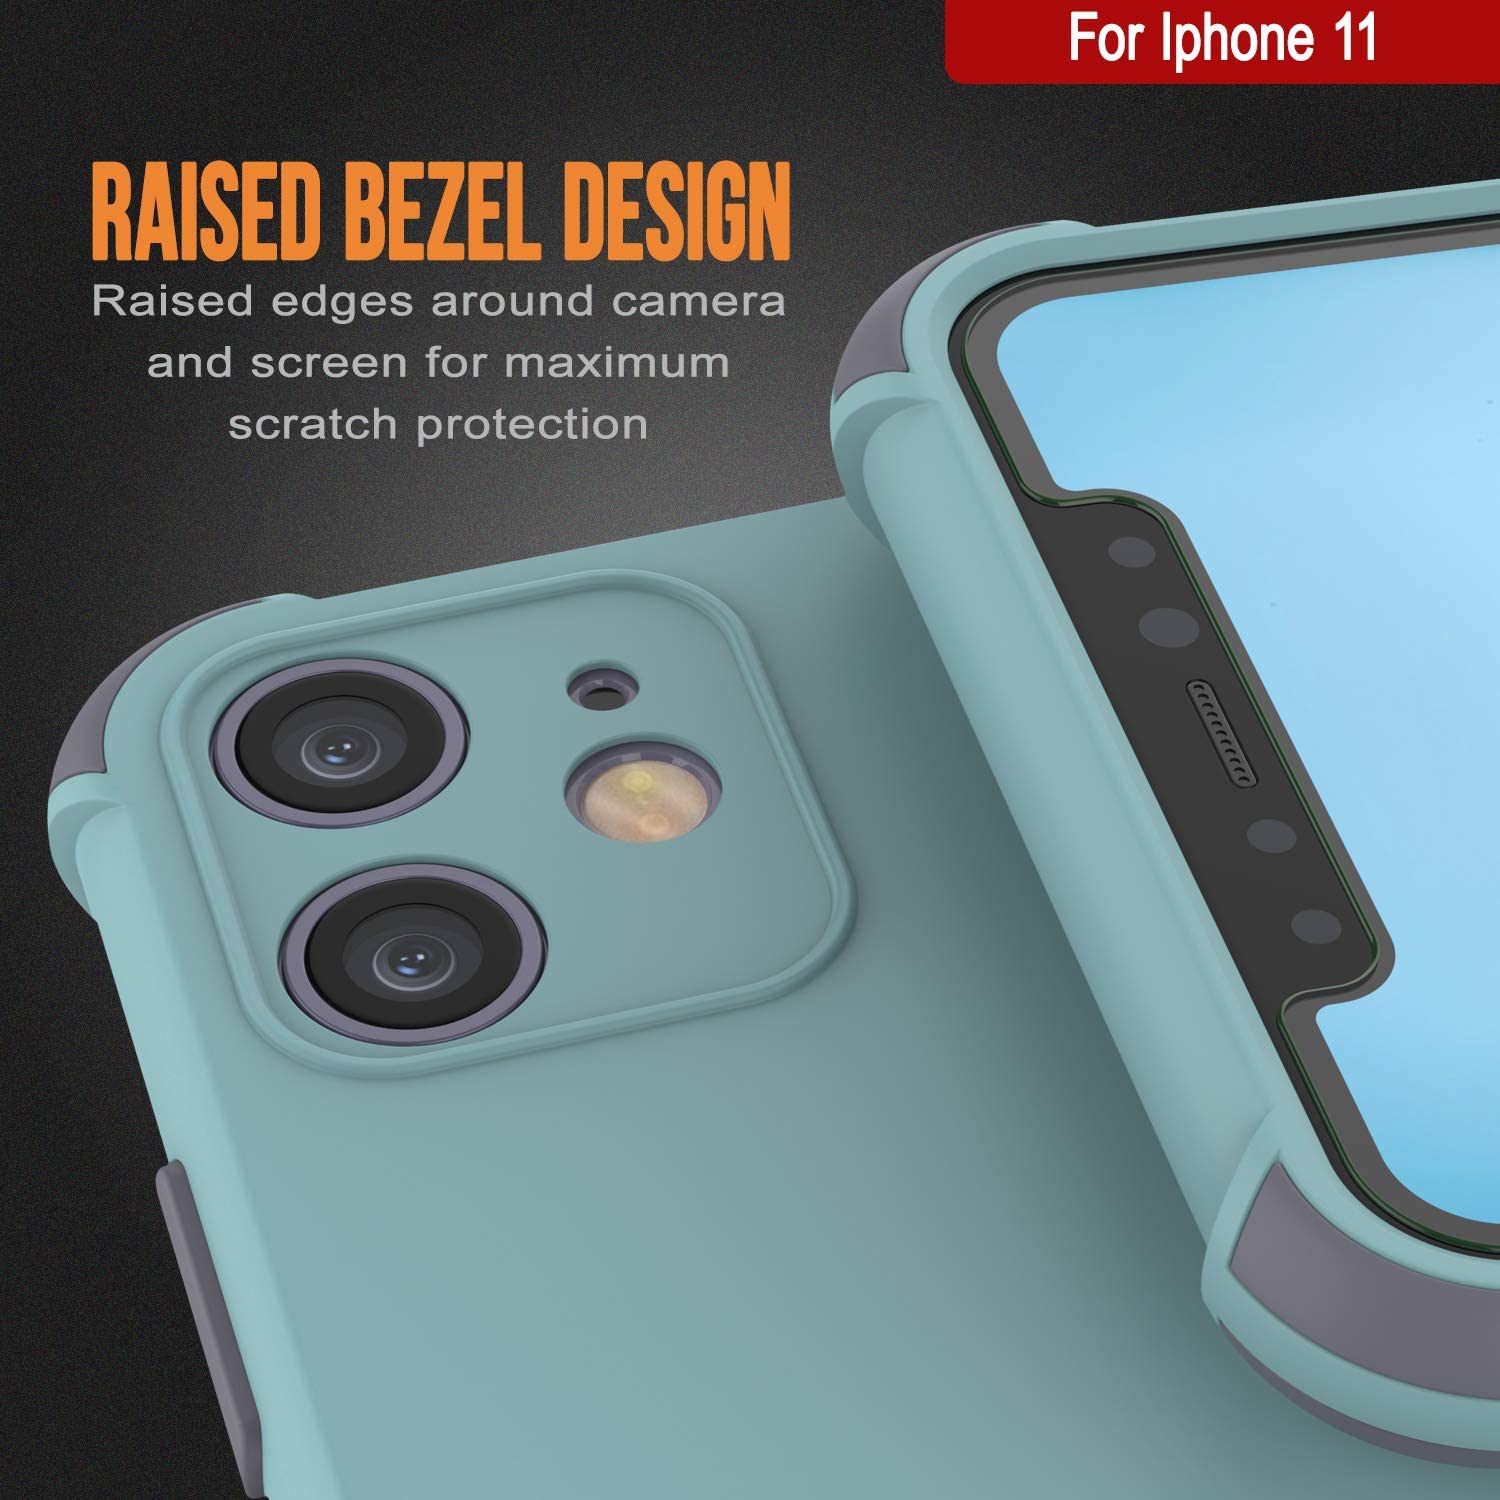 Punkcase Protective & Lightweight TPU Case [Sunshine Series] for iPhone 11 [Teal]